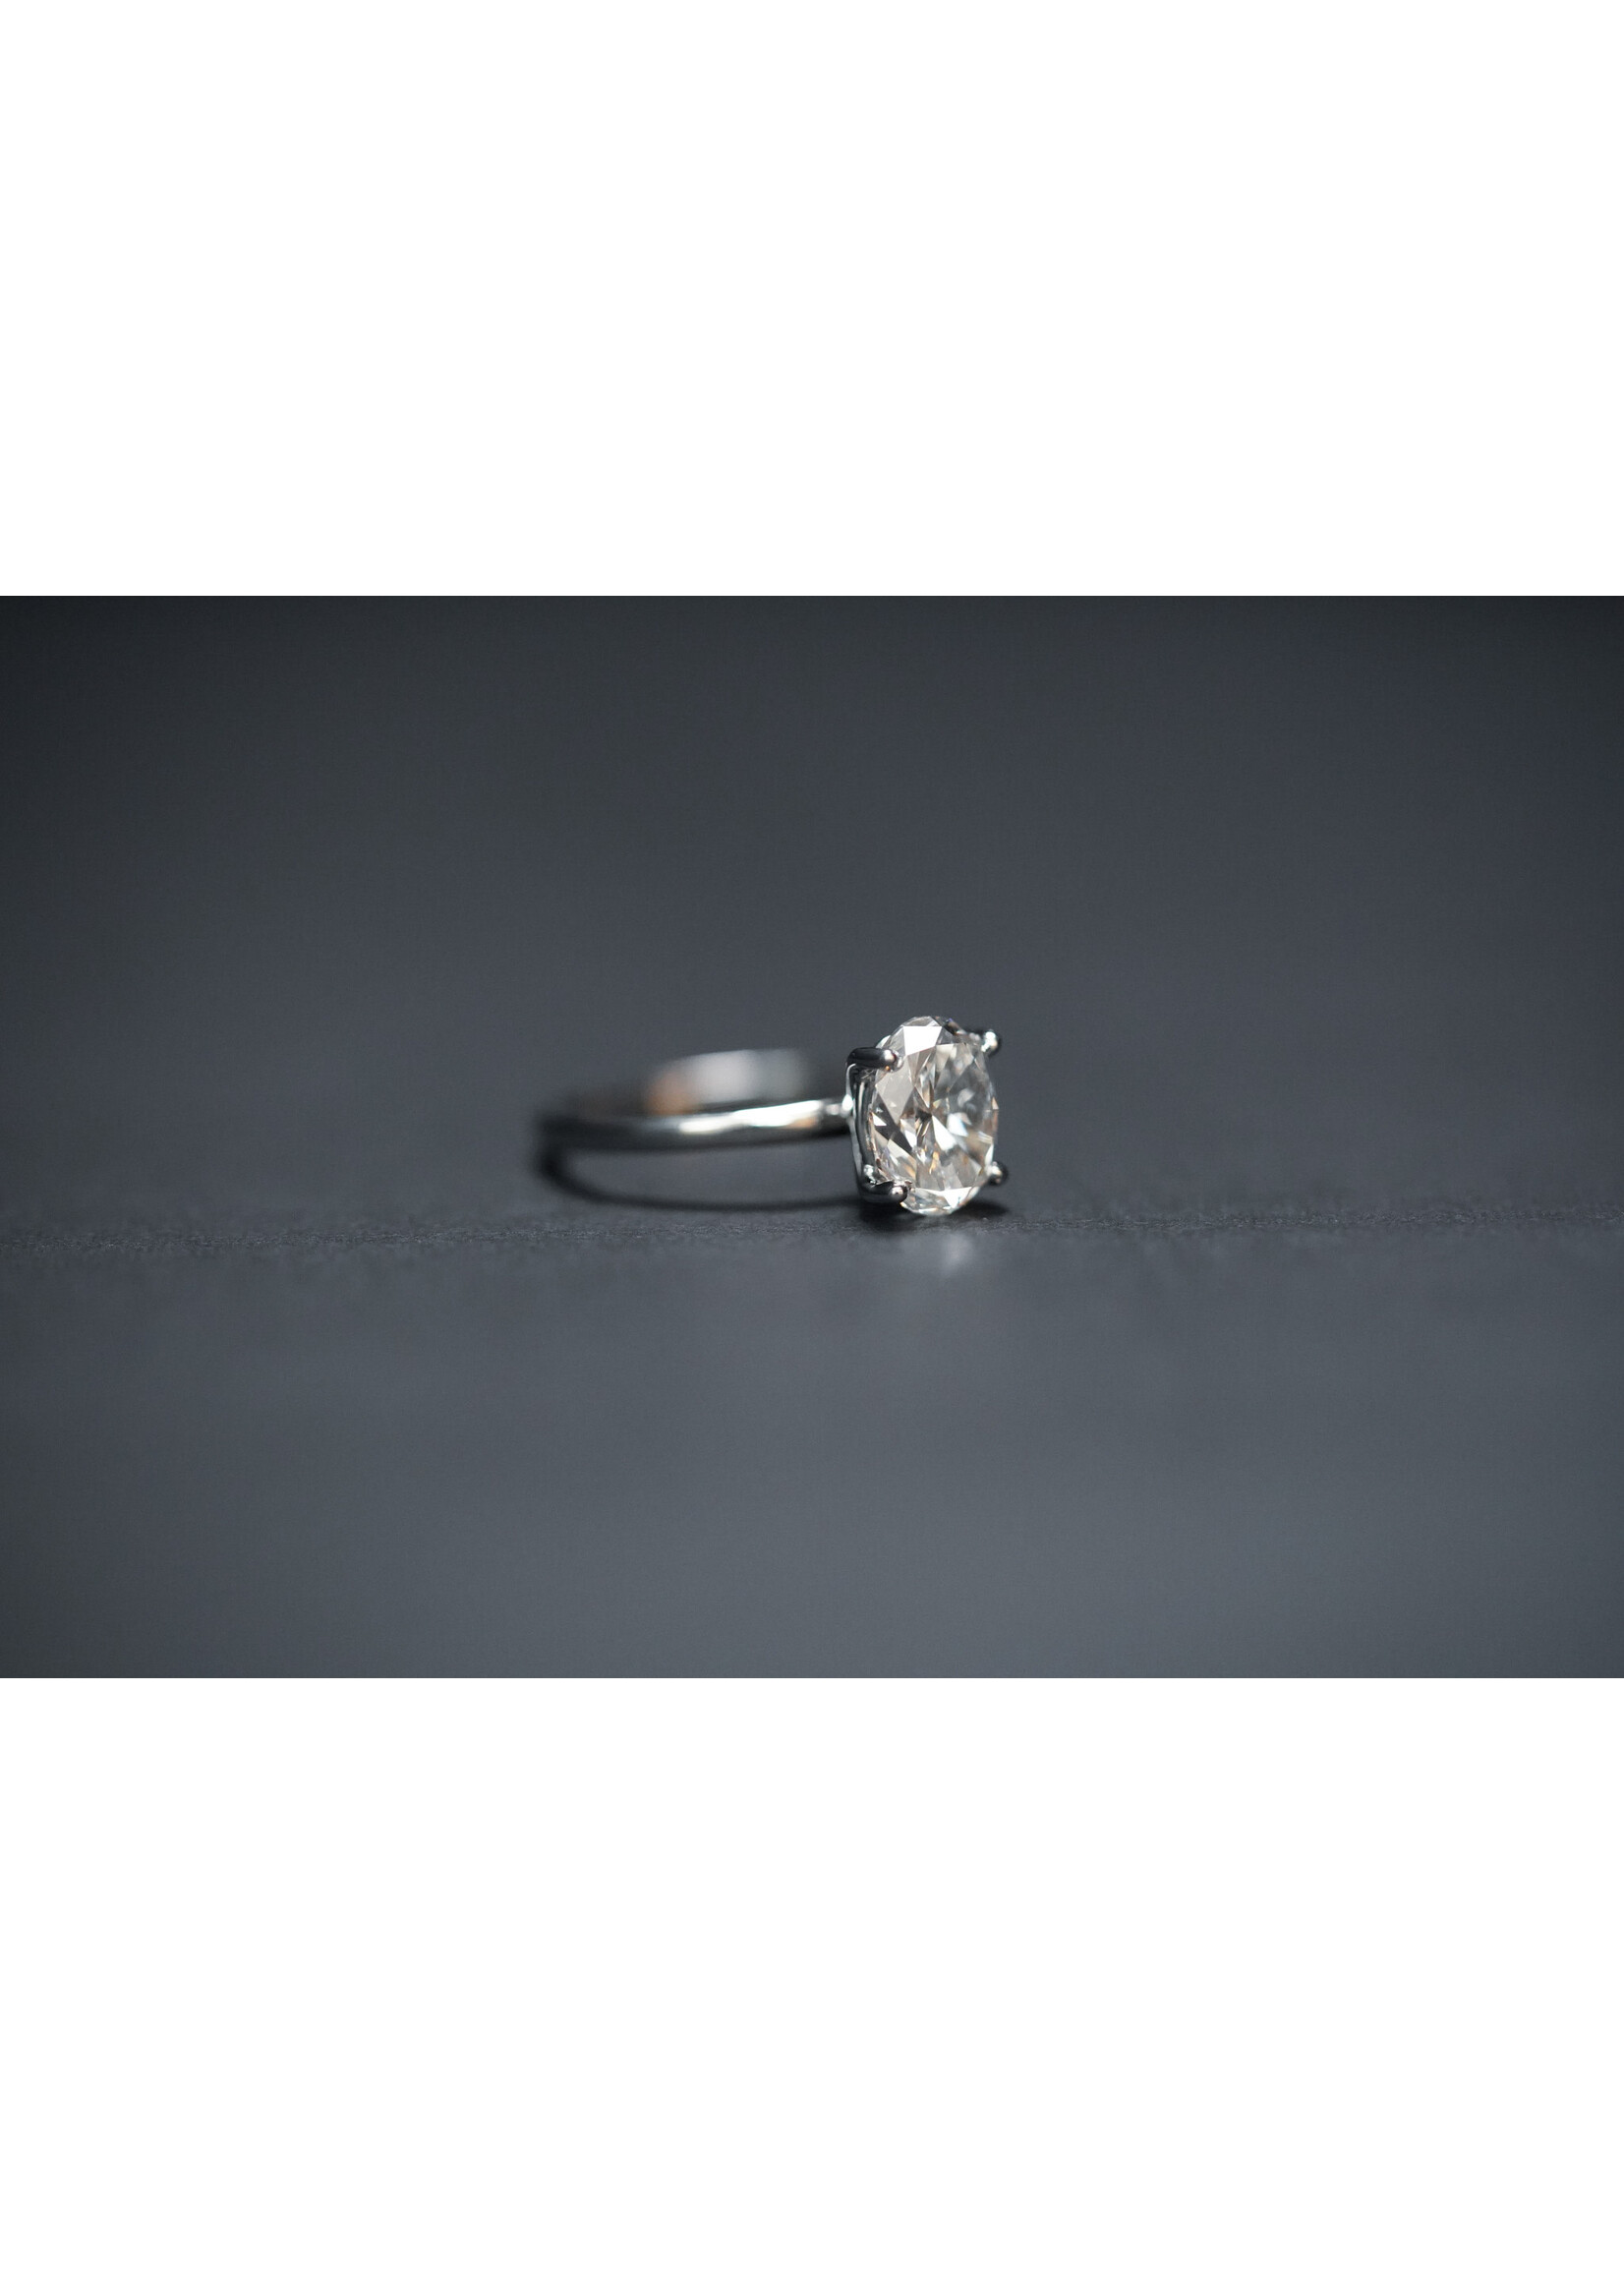 VAETT- 14KW 2.73ct 2.00ct D/SI1 GIA Oval Diamond Solitaire Engagement Ring (size 7)